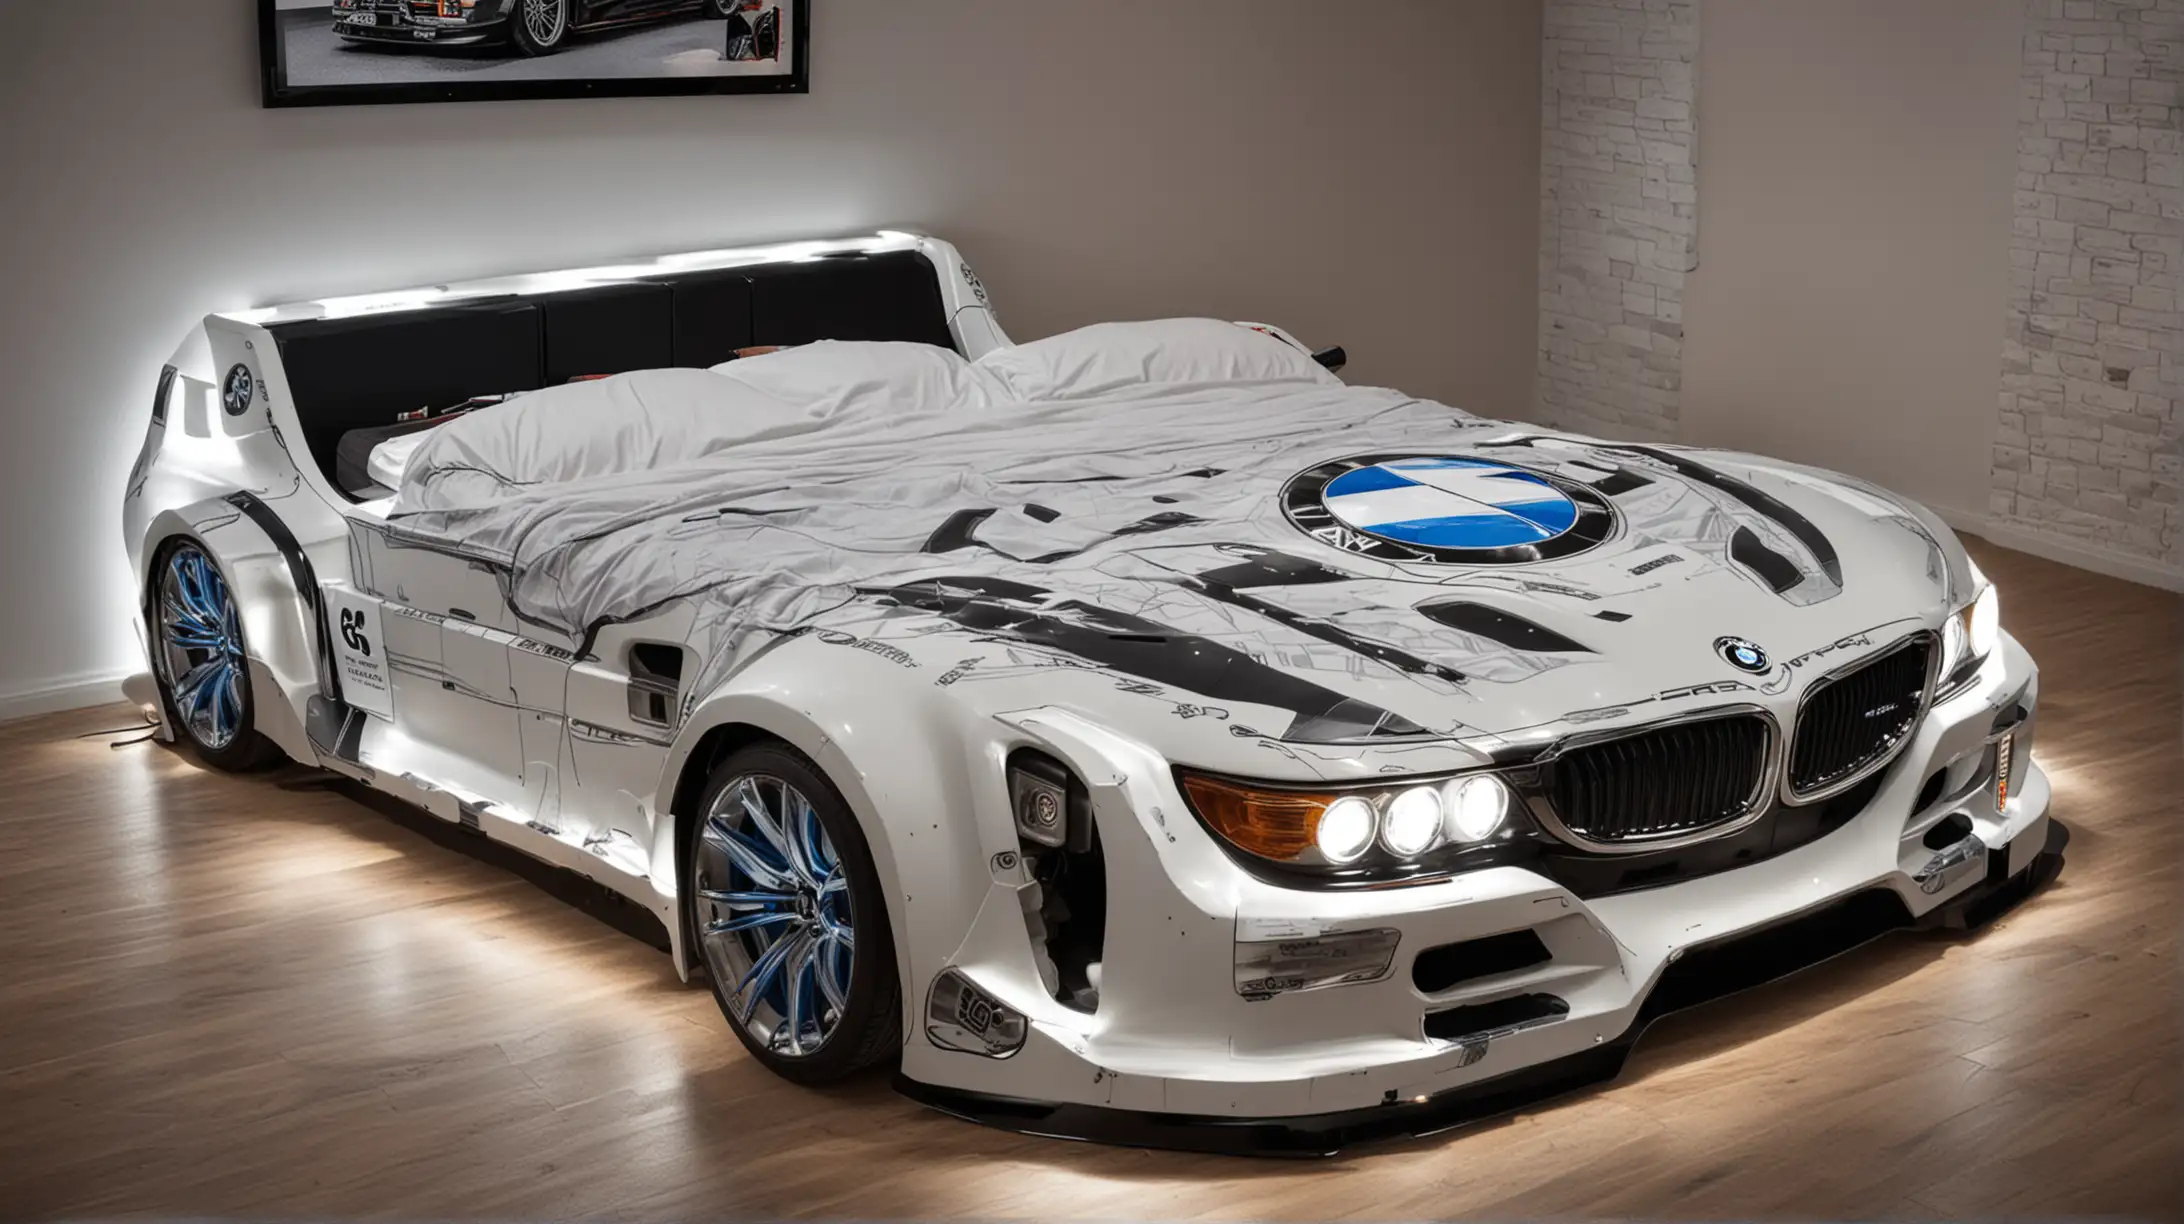 Luxurious BMW CarShaped Double Bed with Headlights and Graphic Design